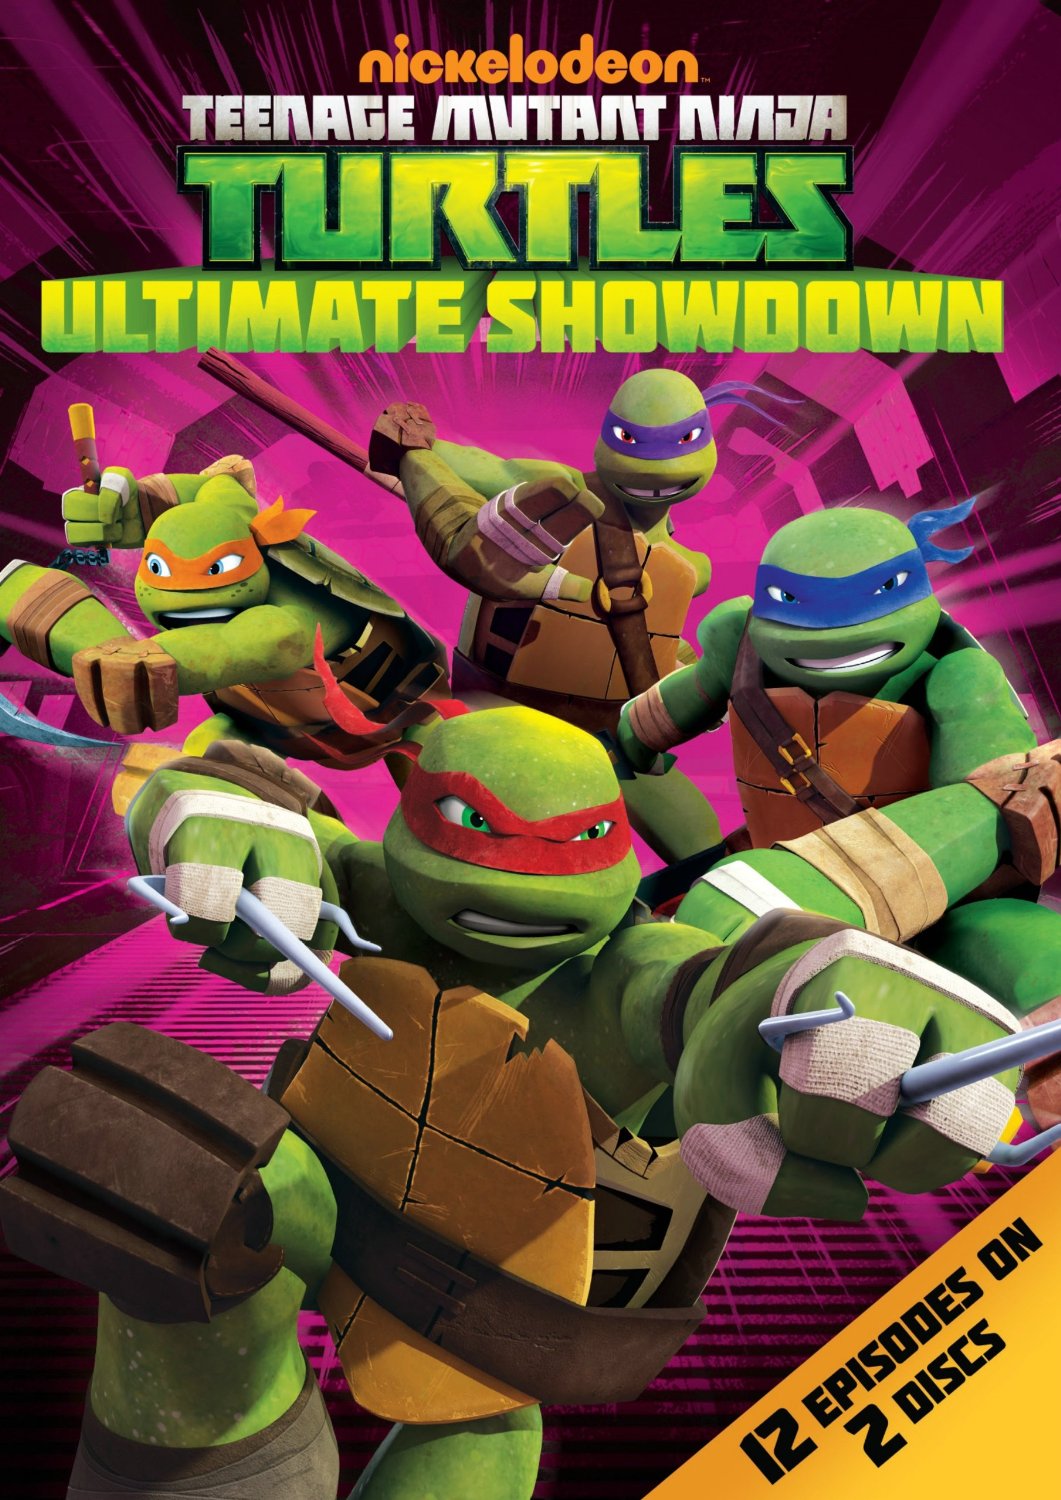 NickALive!: Nickelodeon And Paramount To Release New Teenage Mutant Ninja  Turtles - Ultimate Showdown DVD In The USA On Tuesday 1st October 2013